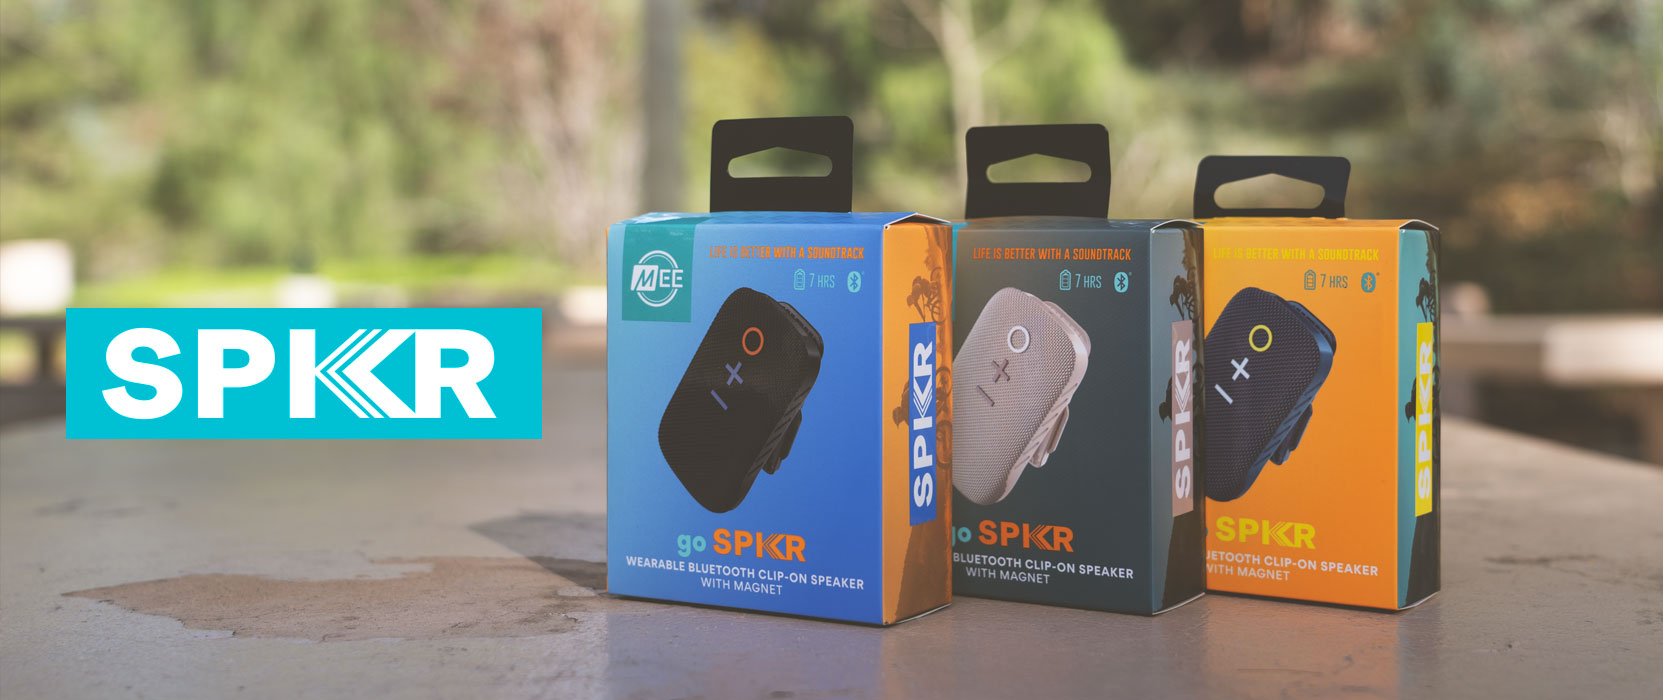 Three "spkr" brand portable speaker packages displayed on a wooden surface outdoors, with variations in design and color labeled as wood, blue, and black.